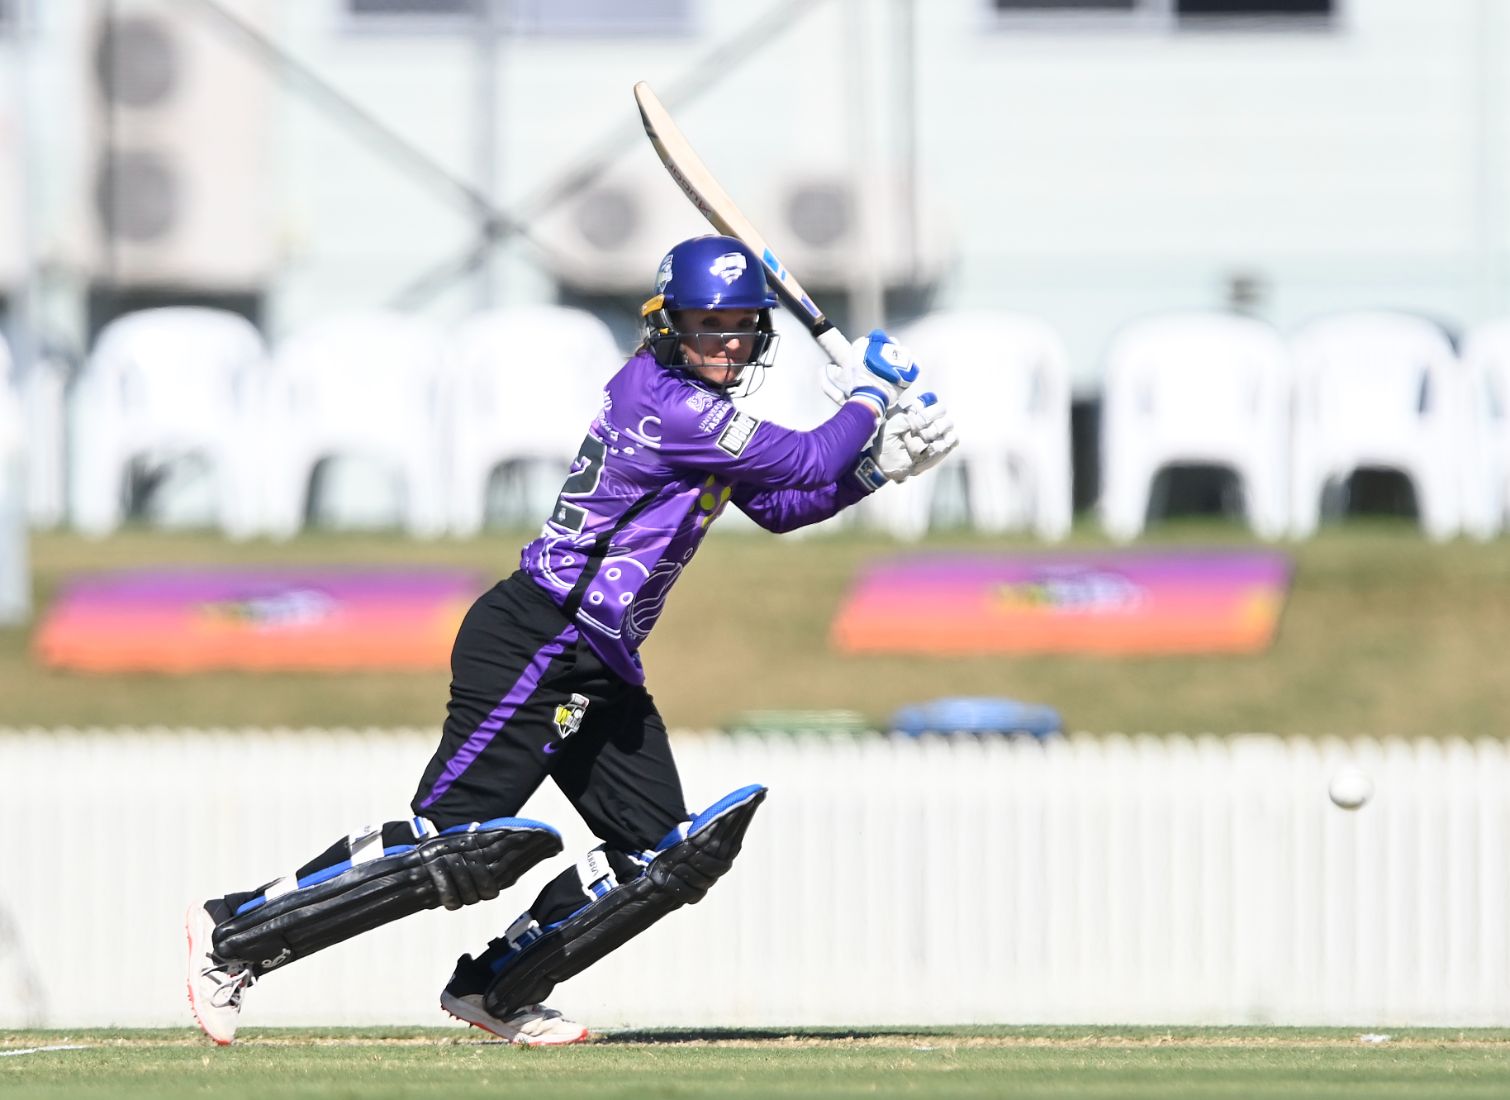 WBBL 2021 | Ruth Johnston powers Hurricanes Women to big win over Renegades 